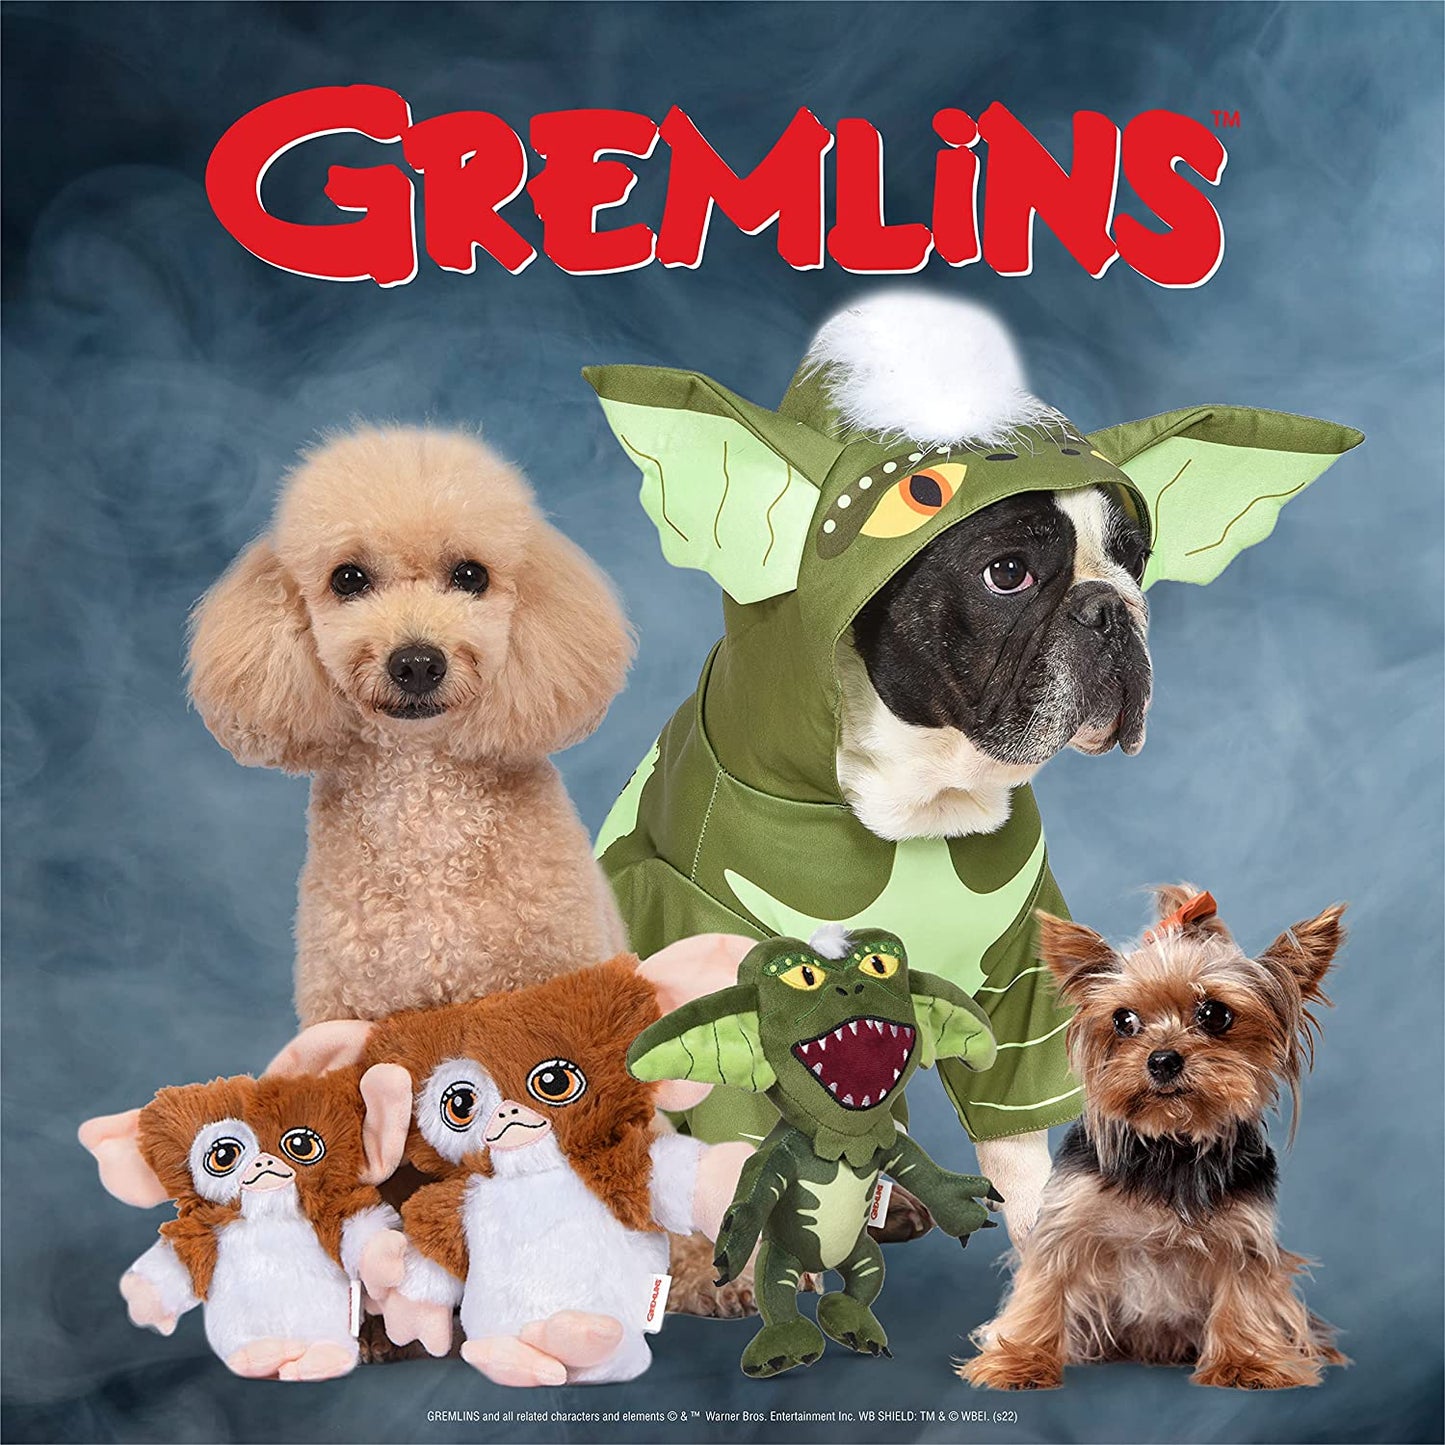 Warner Bros Horror WB: Gremlins Halloween Costume for Dogs with Hood – Size Large | Cute Pet Costumes, Scary Costumes for Dogs| Officially Licensed Gremlins Pet Products, Green (FF23213)